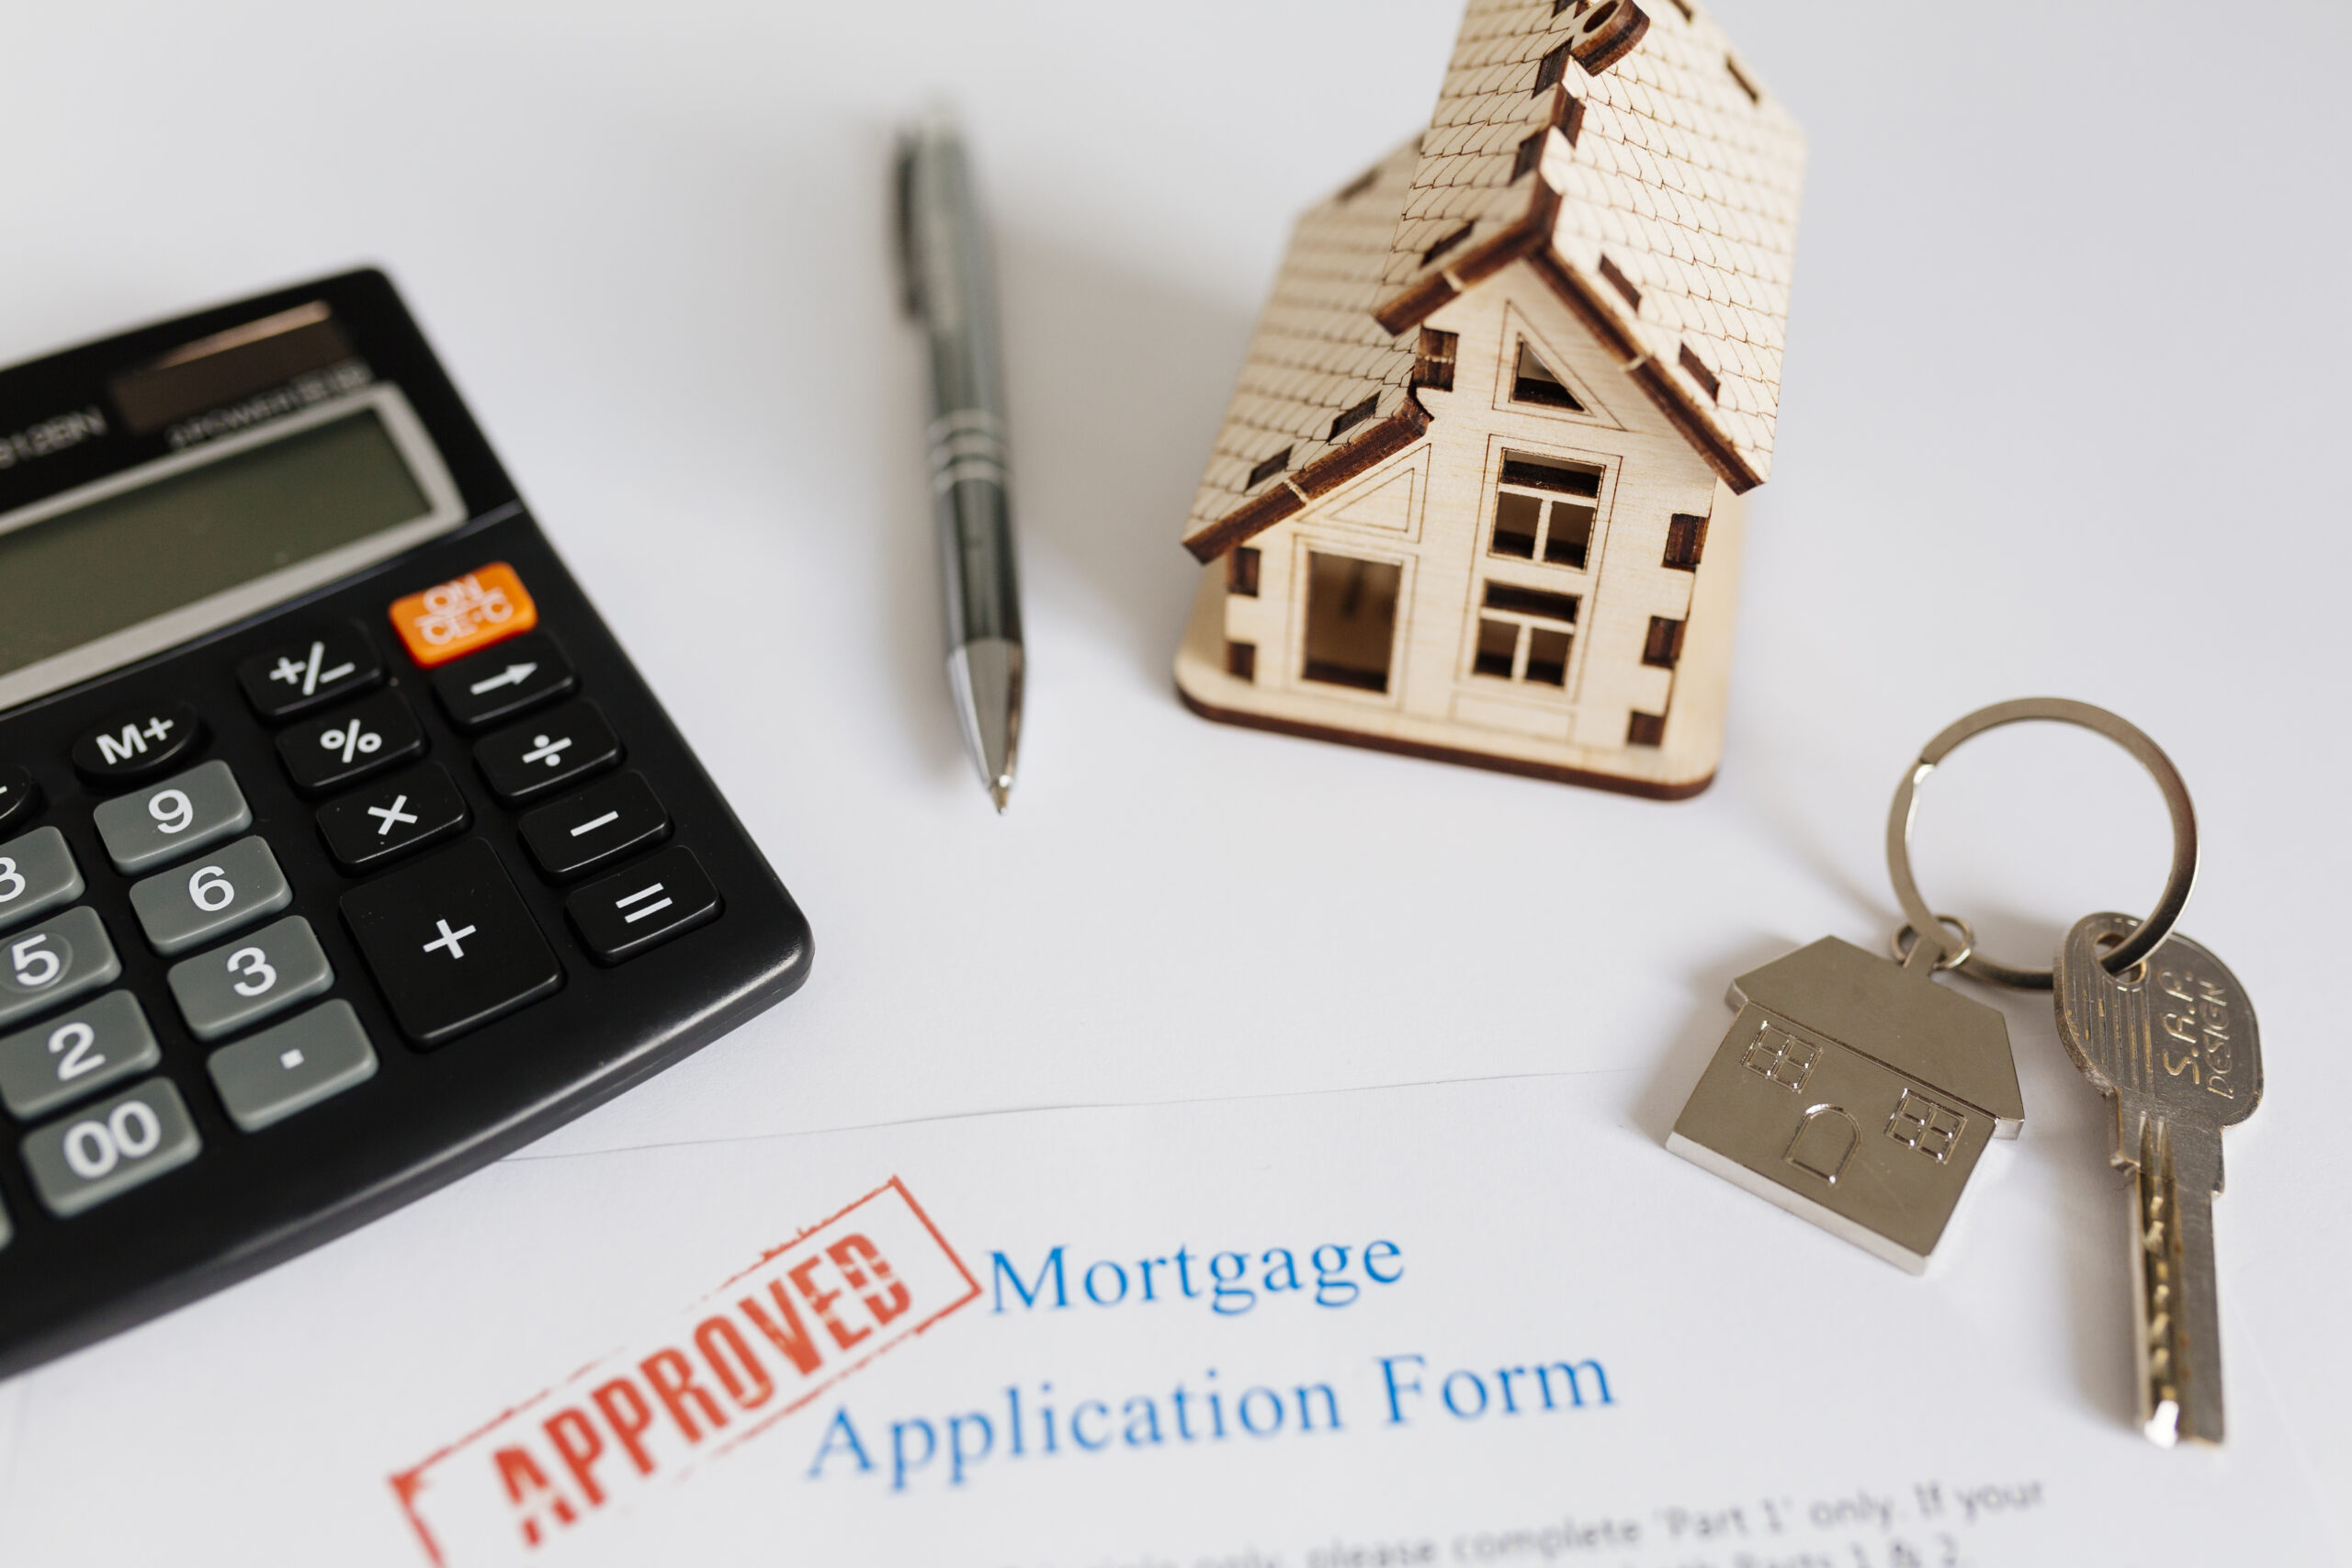 Housing or Mortgage Services: